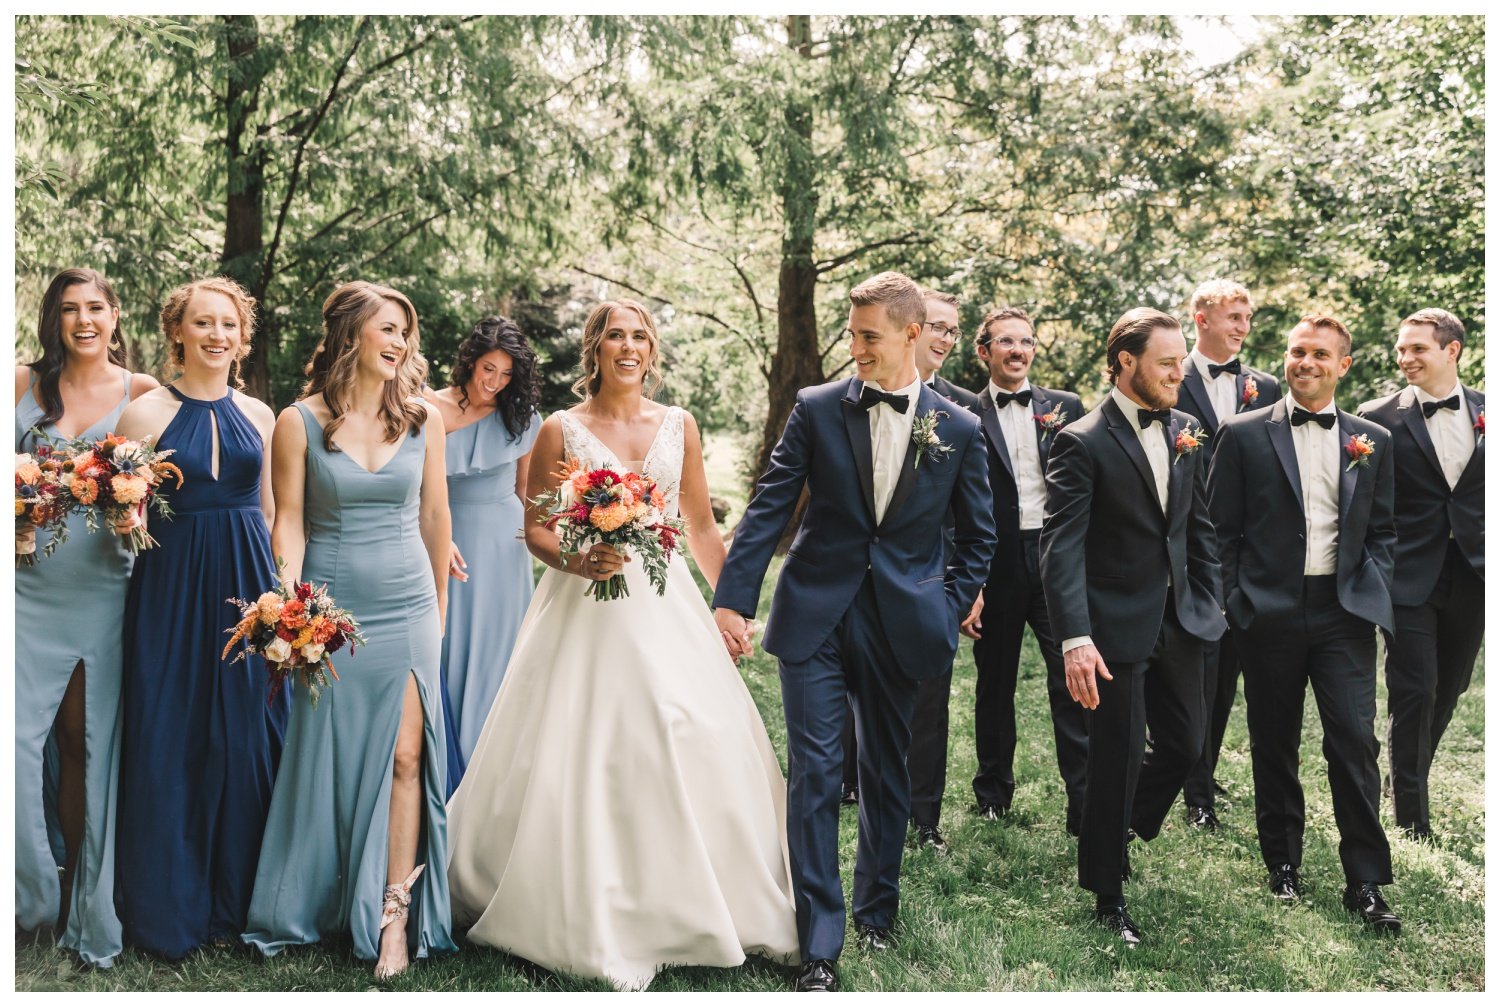 The Barn at Silverstone Wedding, Lancaster PA, bridal party, dusty blue, navy